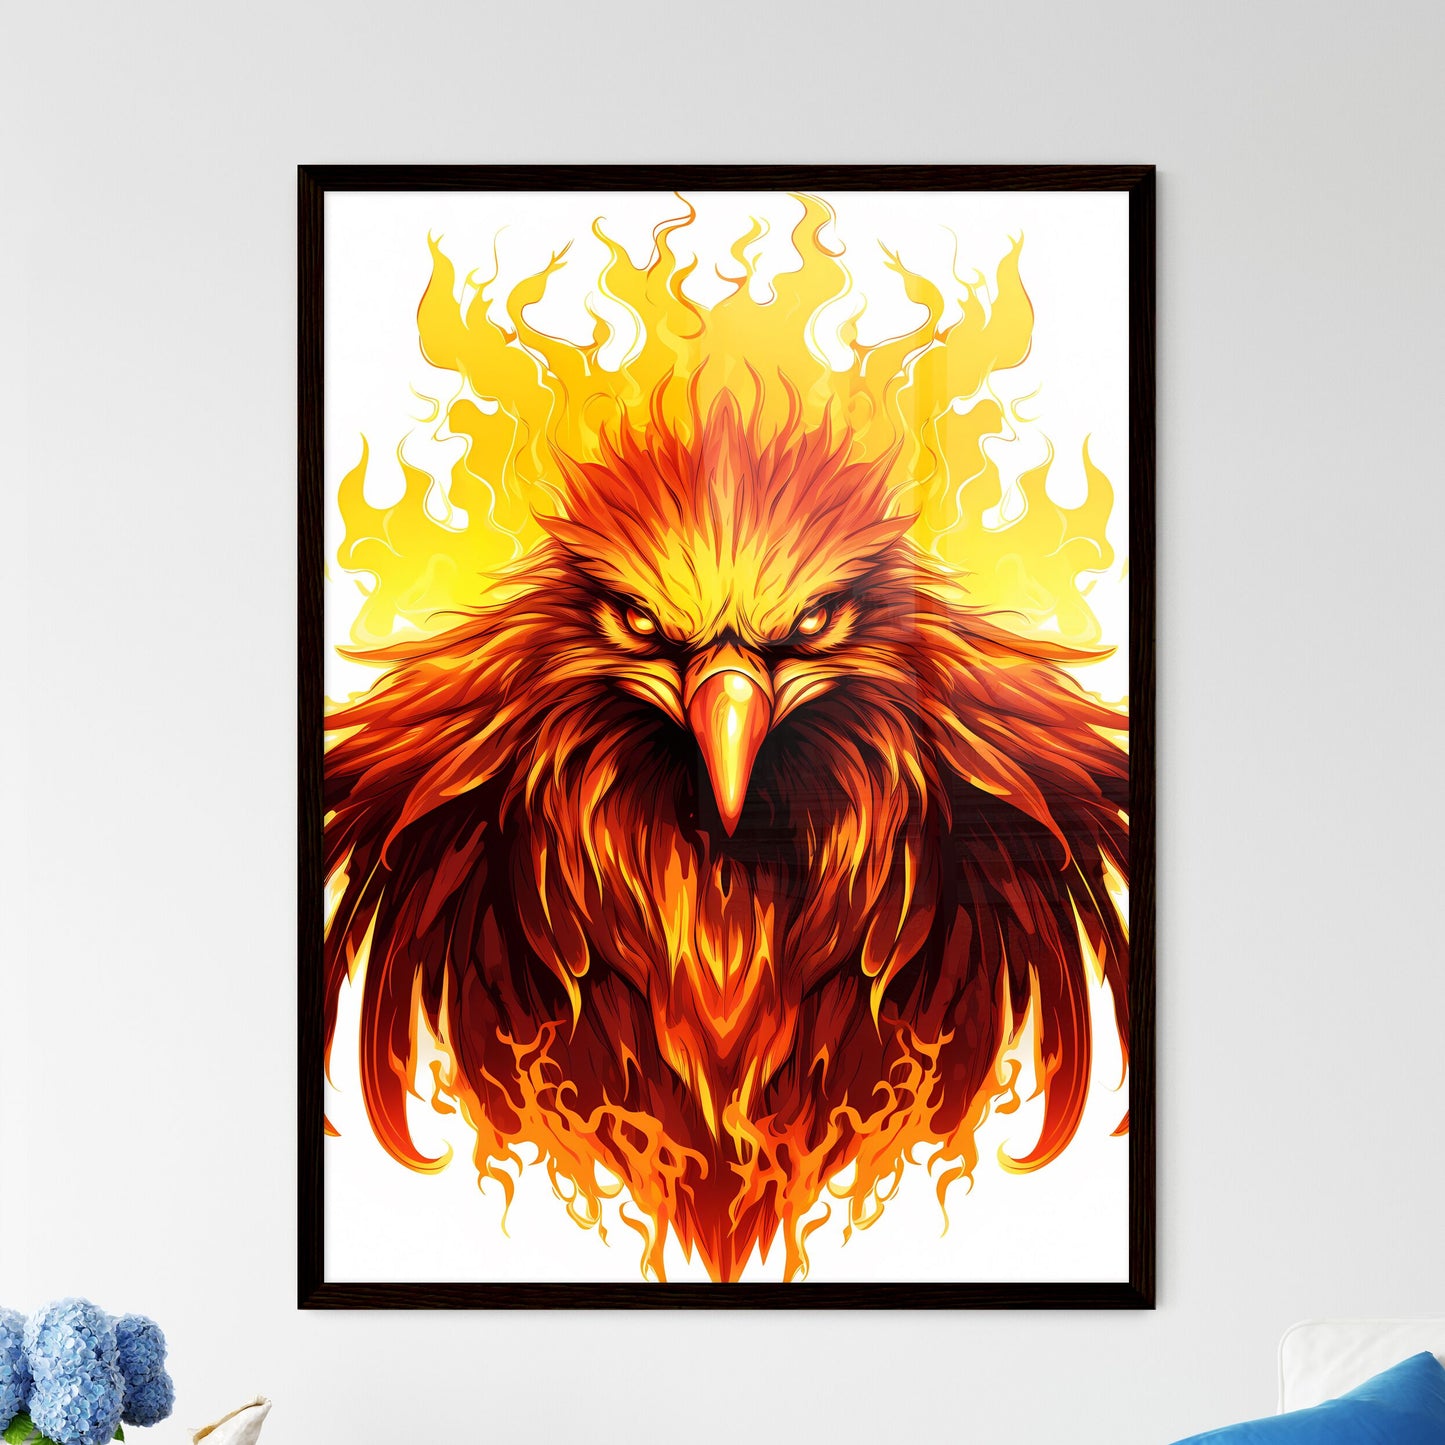 Vibrant Art of Eagle Soaring over Sun with Fire Flames Default Title